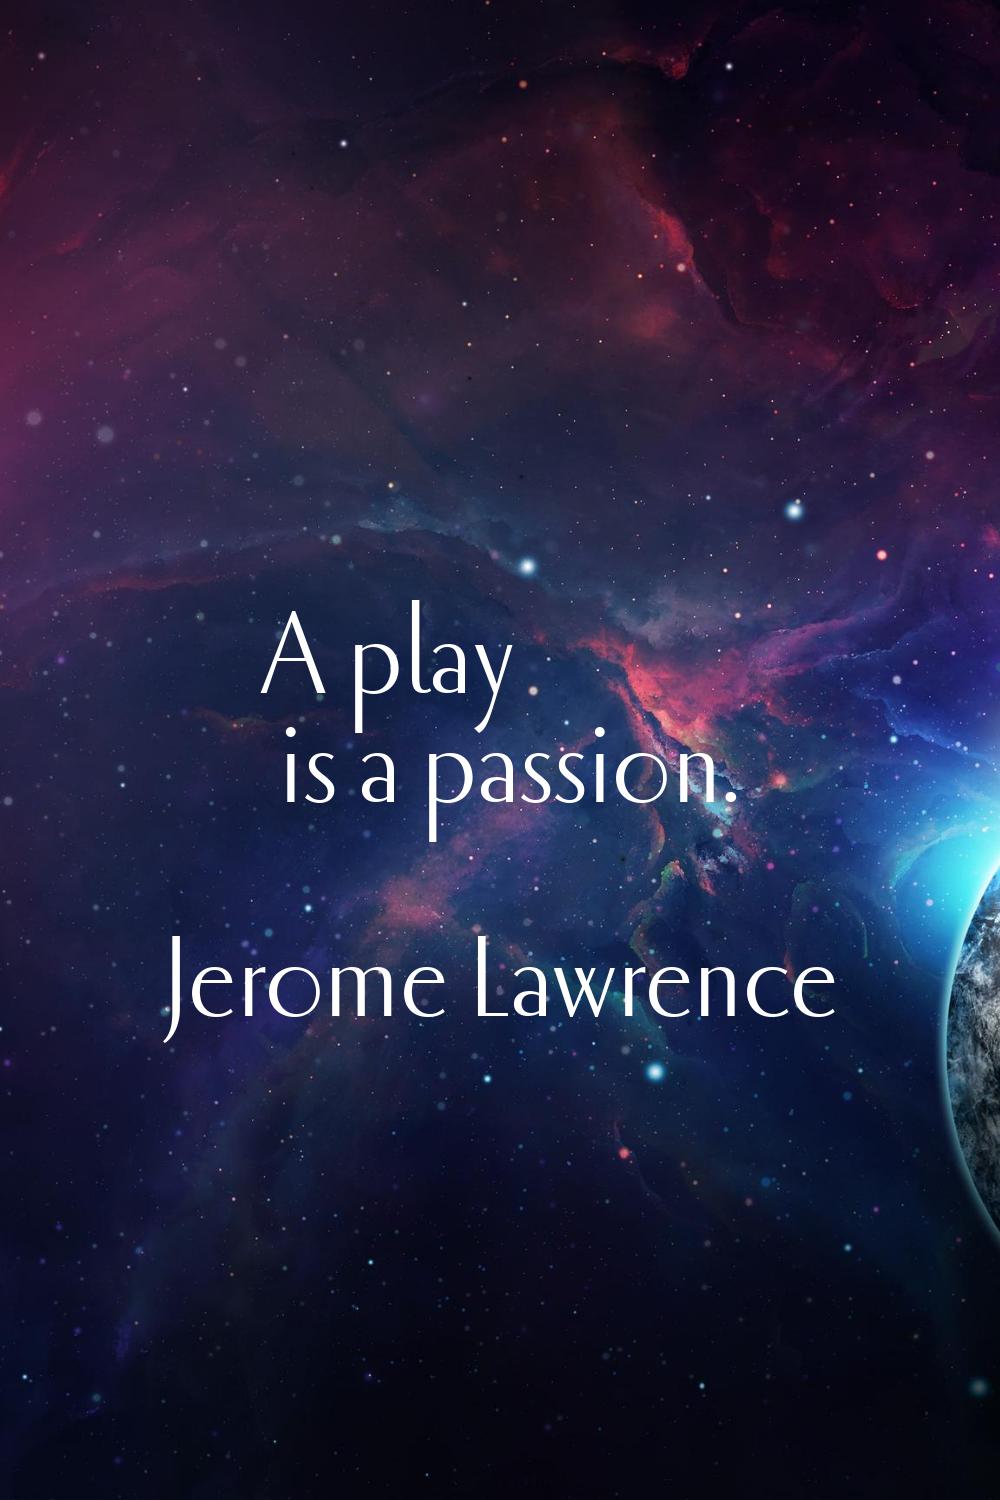 A play is a passion.